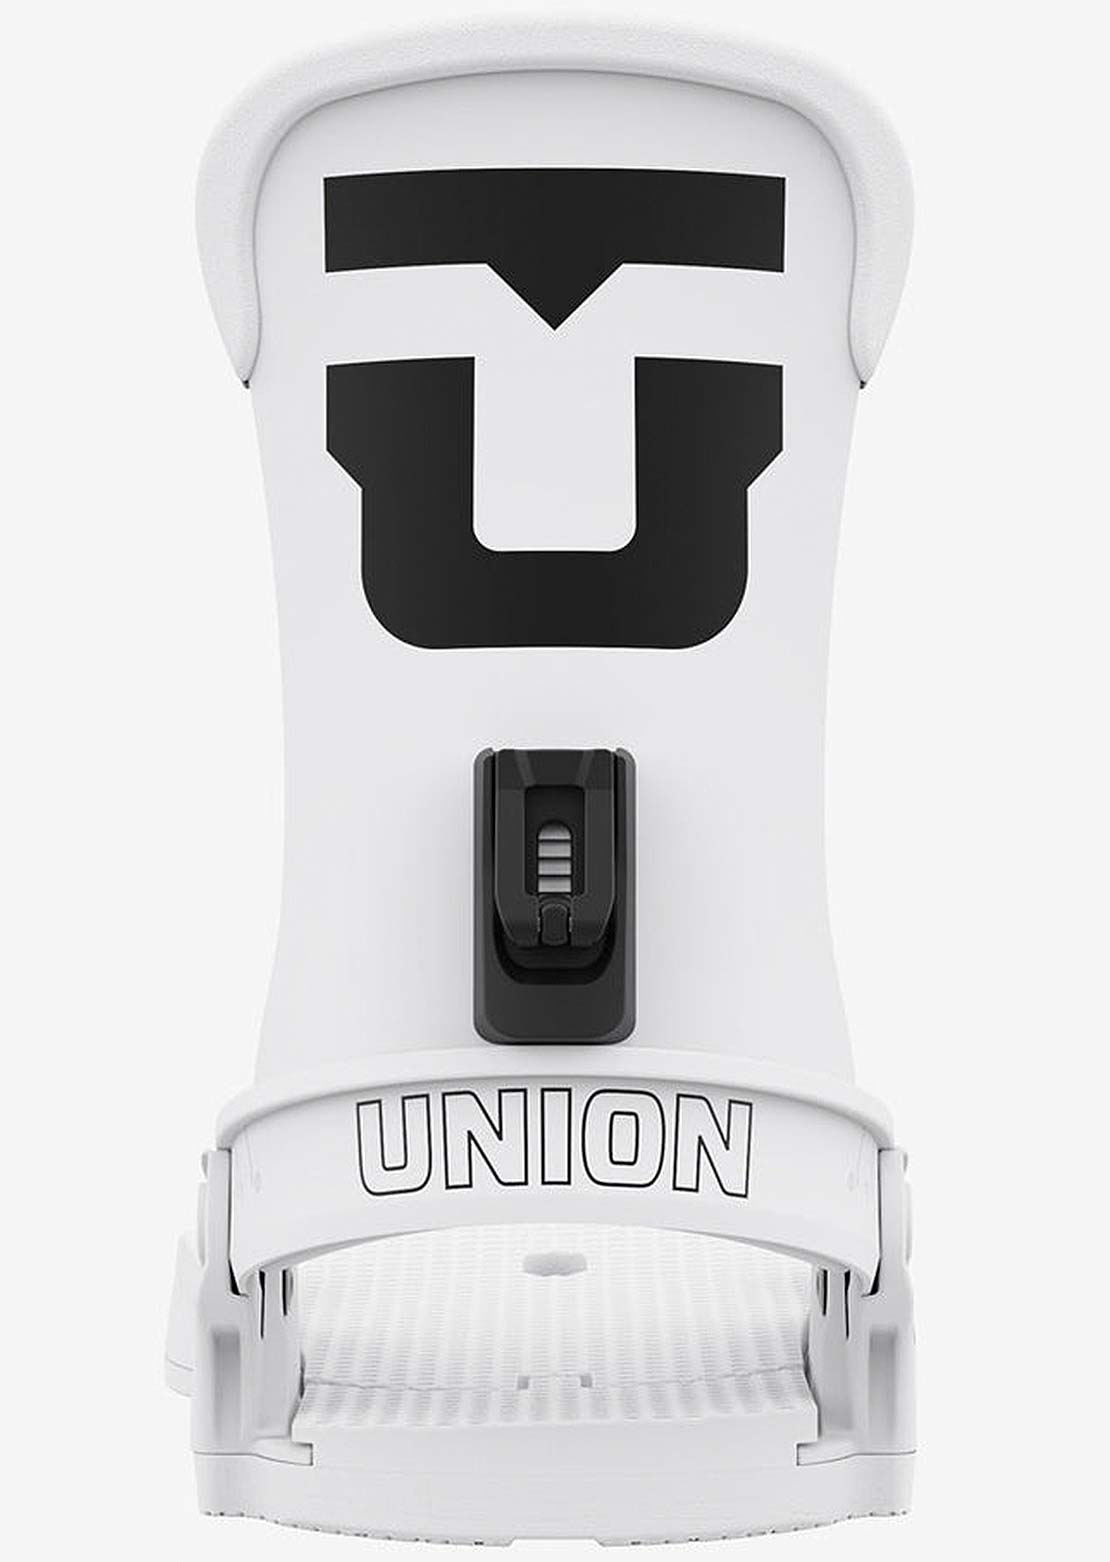 Union Force Classic (T.HB) Snowboard Bindings White